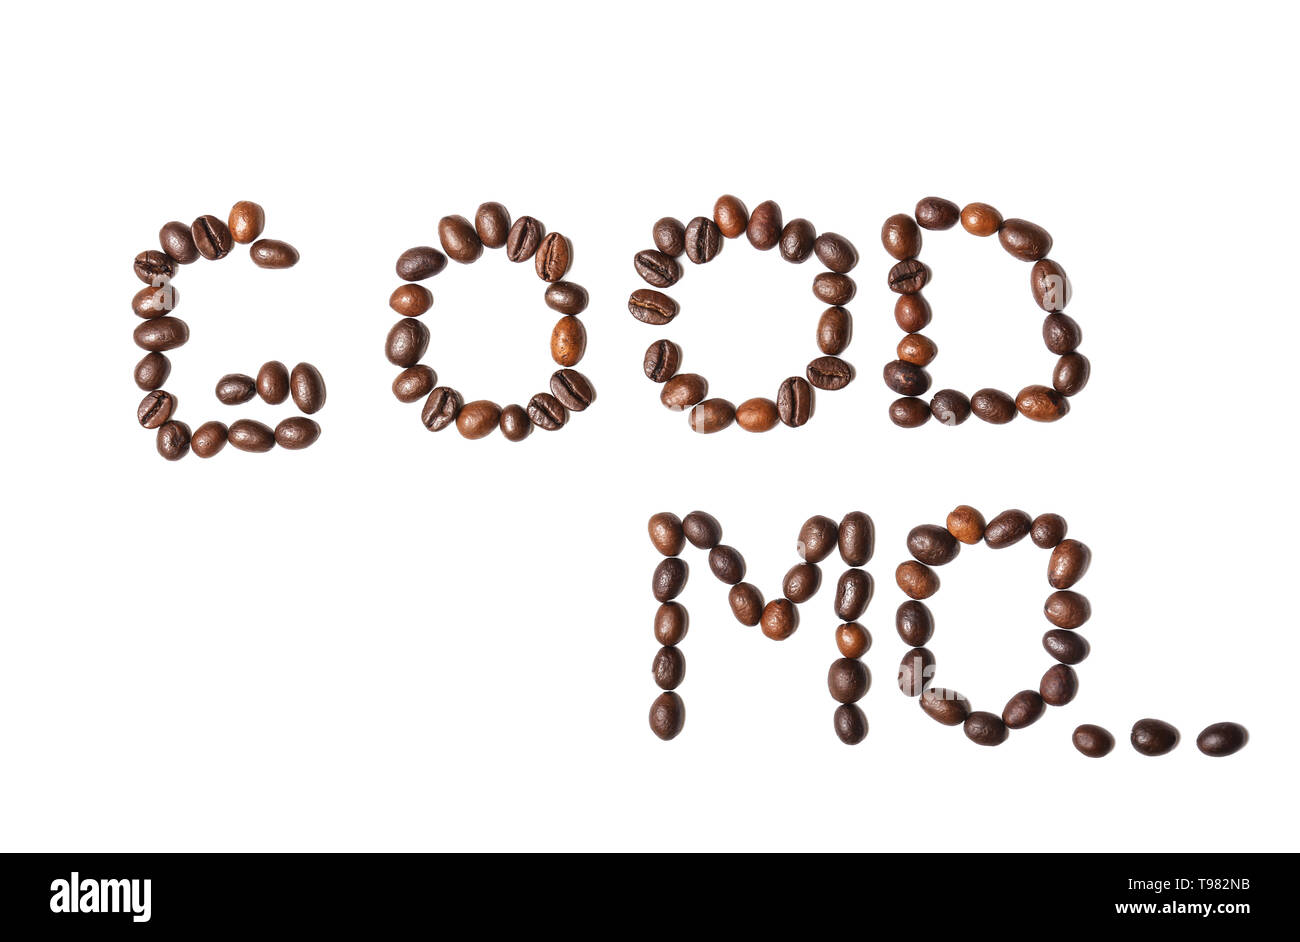 Text GOOD MO... made of roasted coffee beans on white background Stock Photo